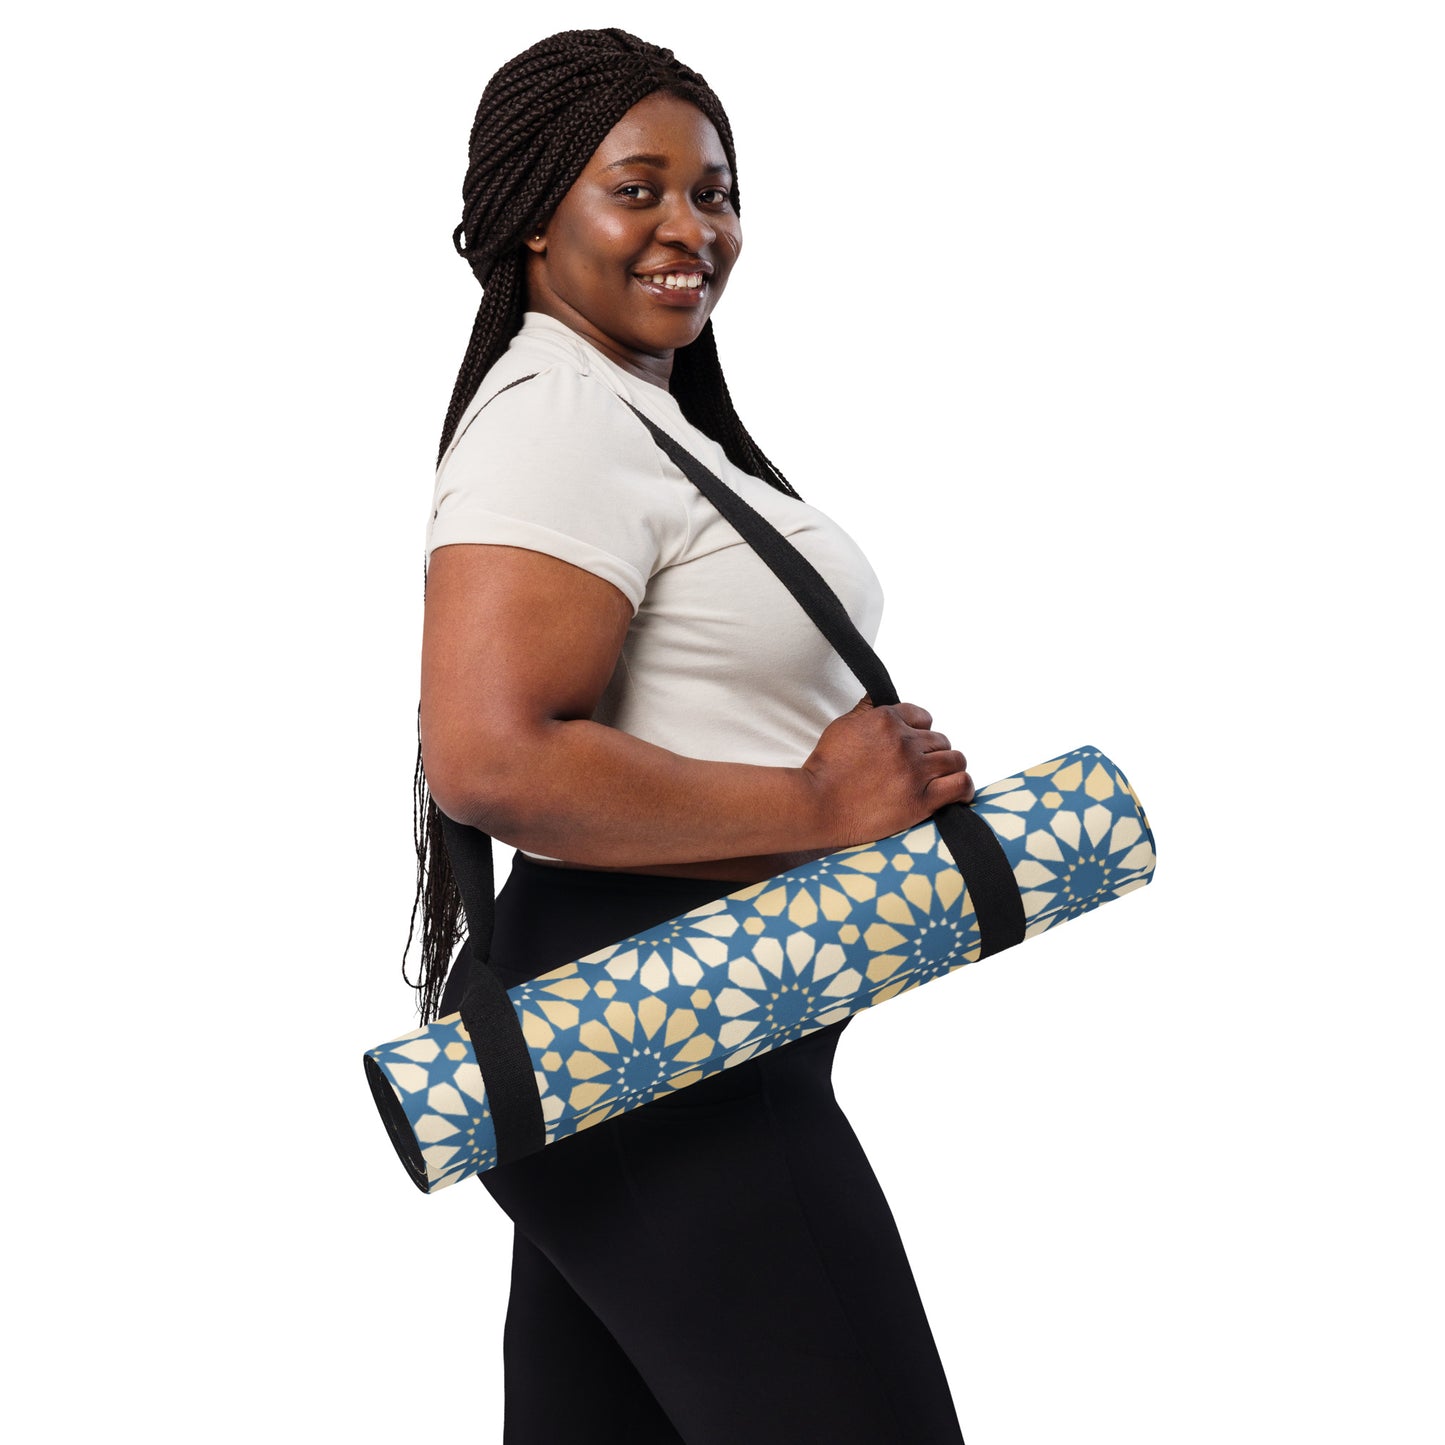 Yoga mat perfect for exercising, stretching or meditating. Anti-slip rubber on the bottom. Sunflower Collection